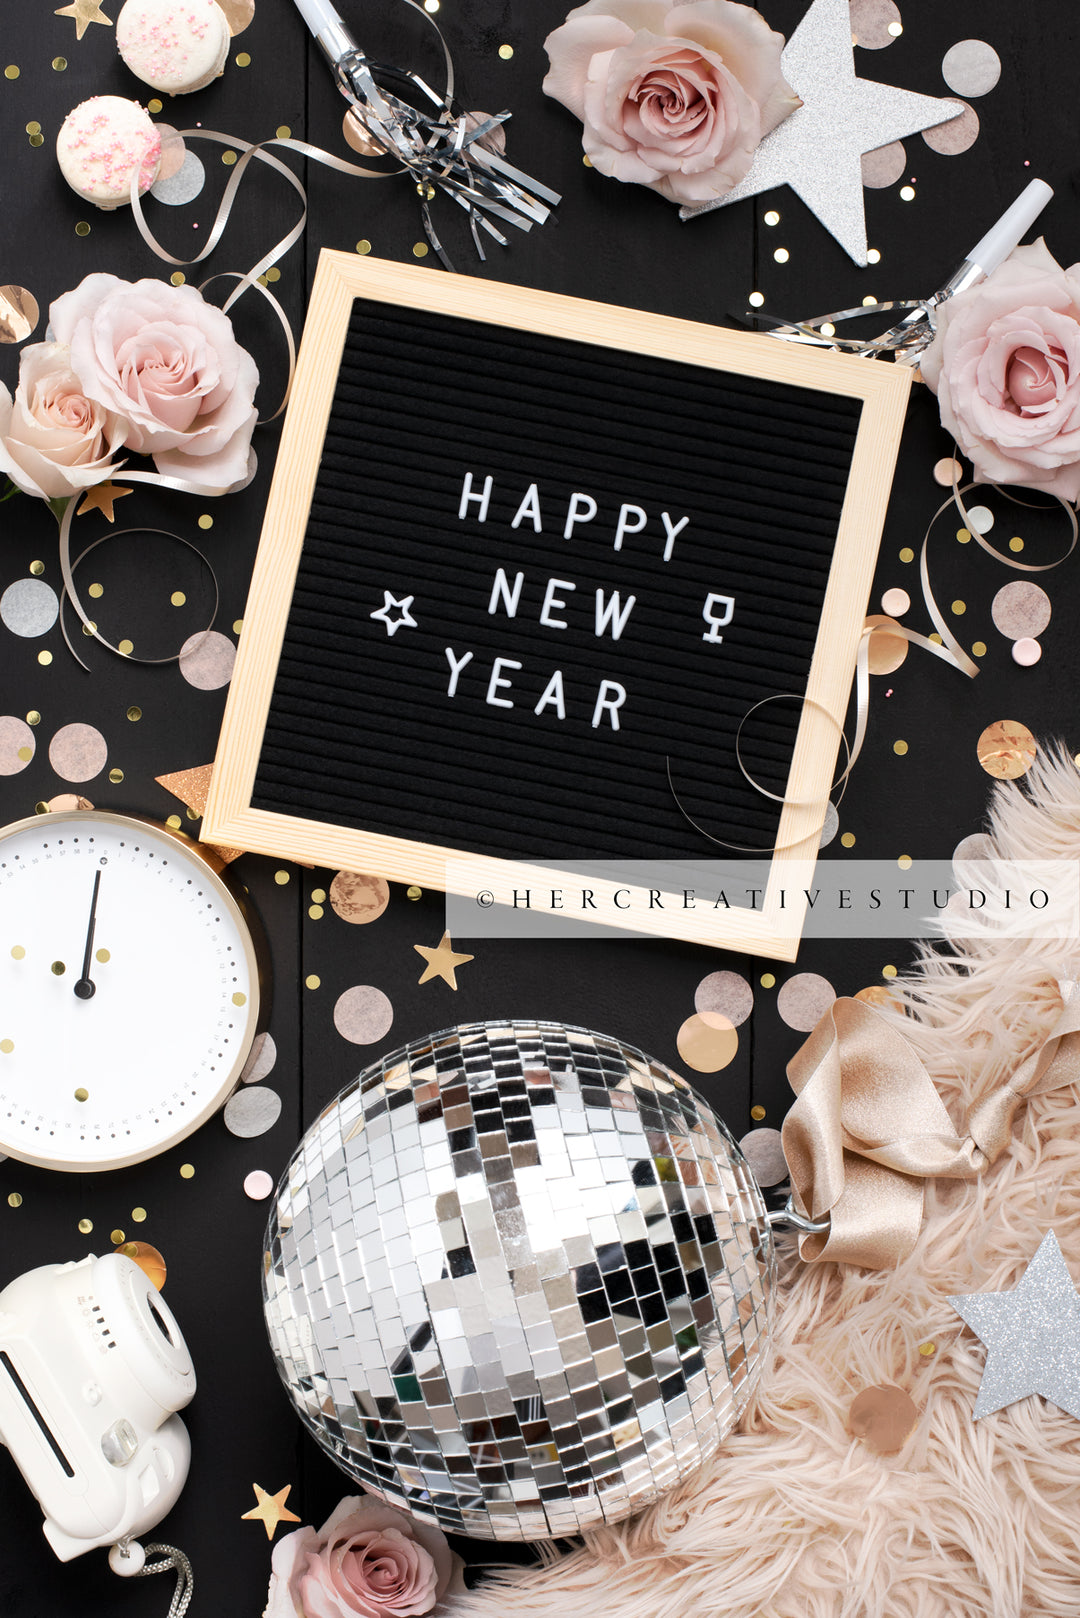 Disco Ball, Letterboard & Roses, Stock Image